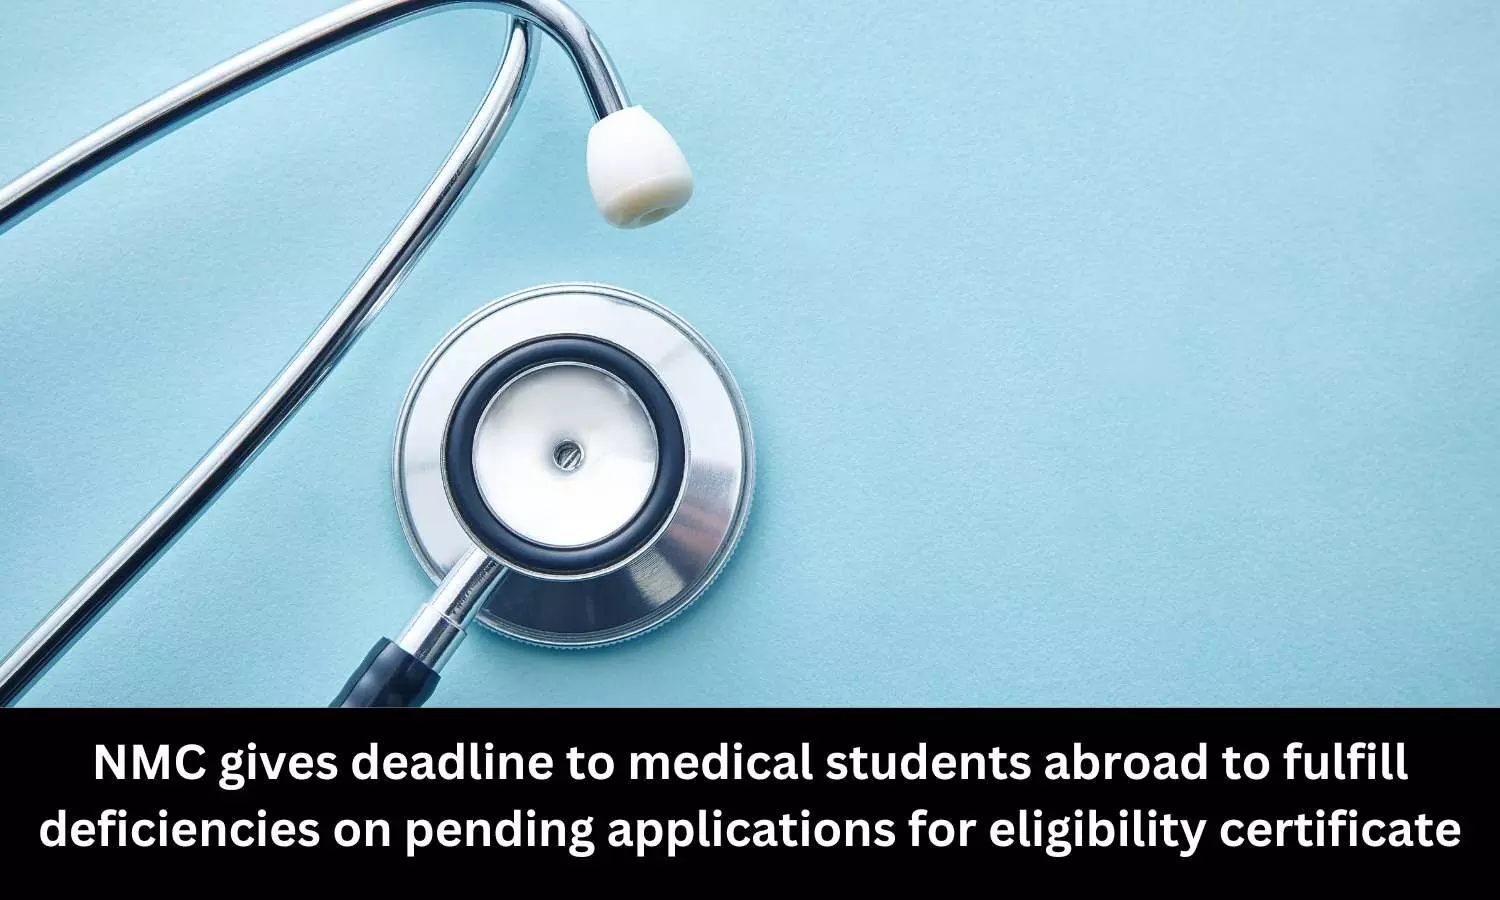 NMC gives deadline to medical students abroad to fulfill deficiencies on pending applications for eligibility certificate